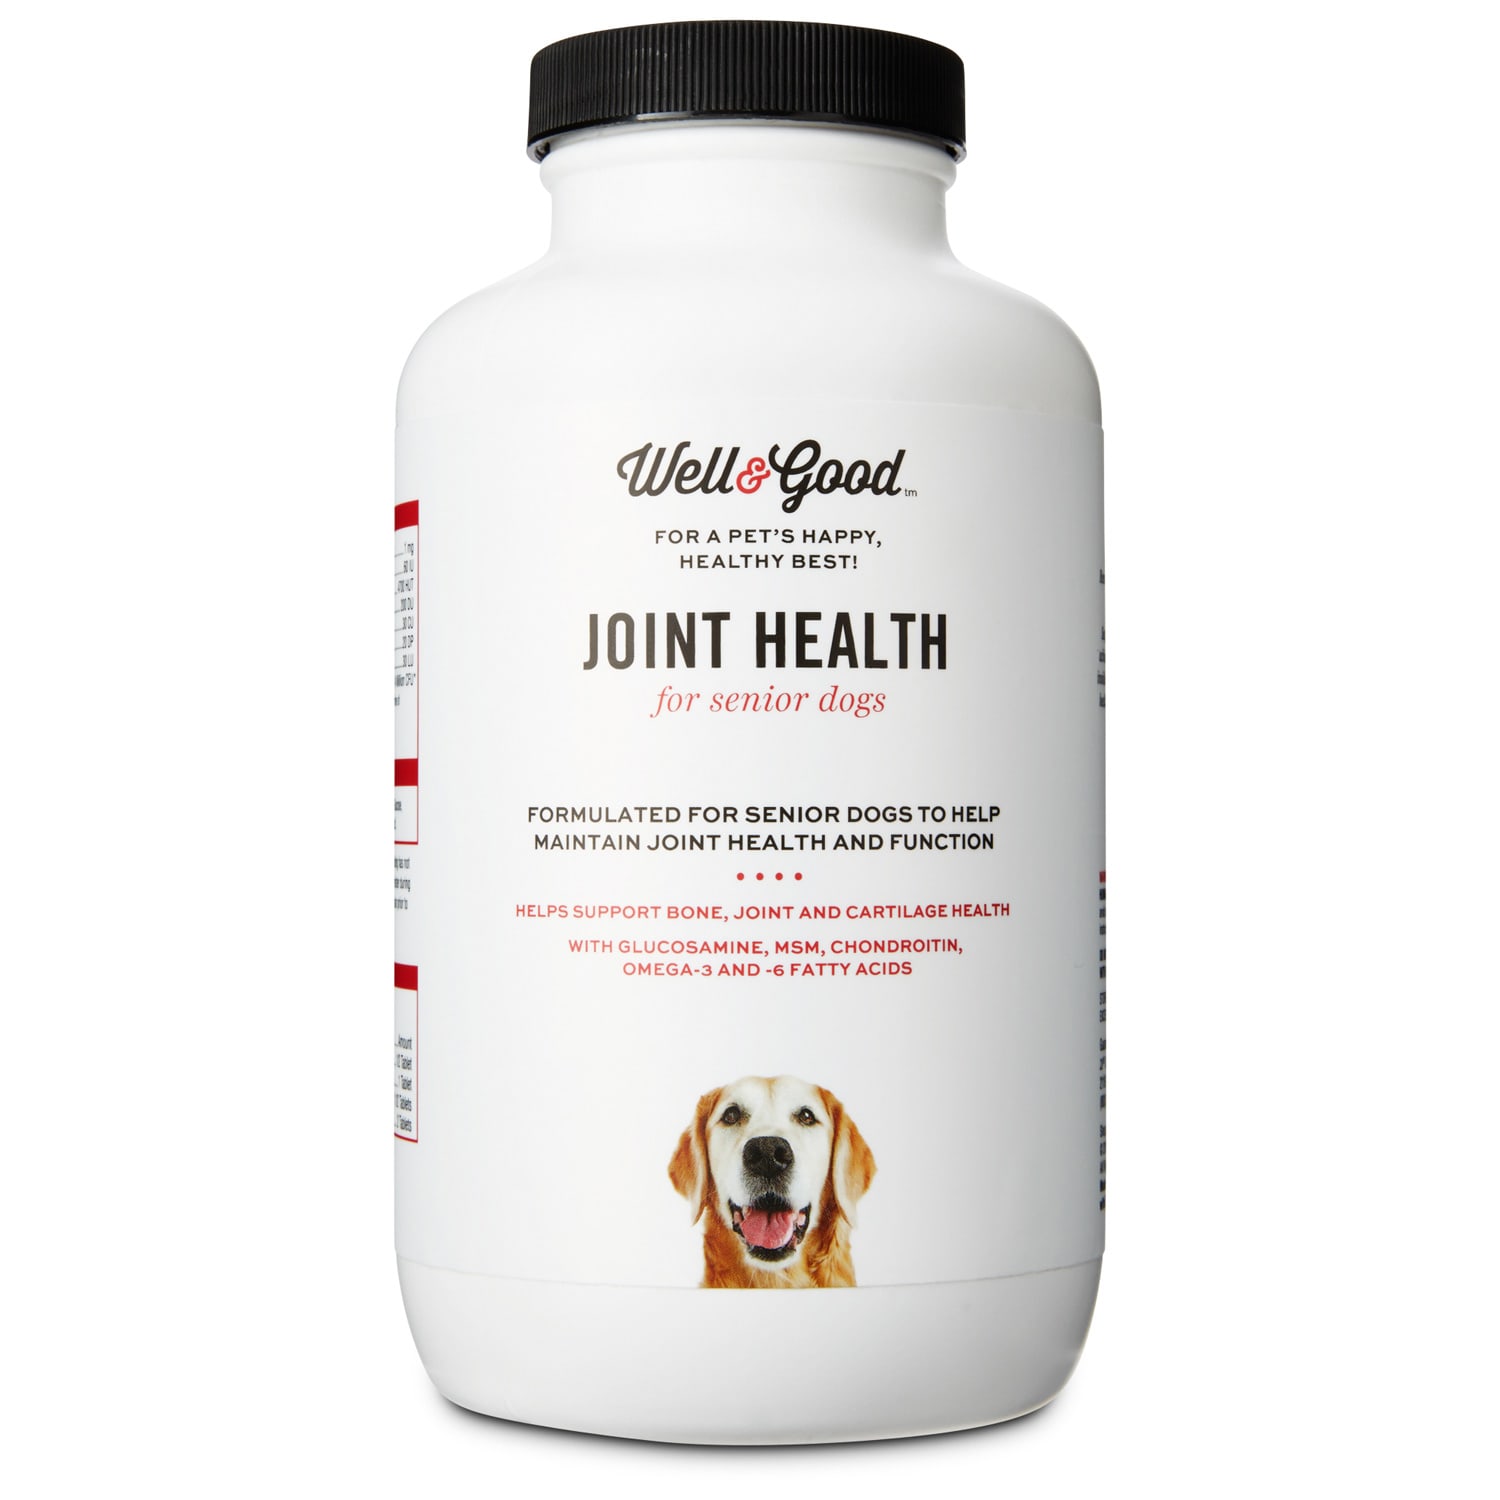 hip & joint health for senior dogs